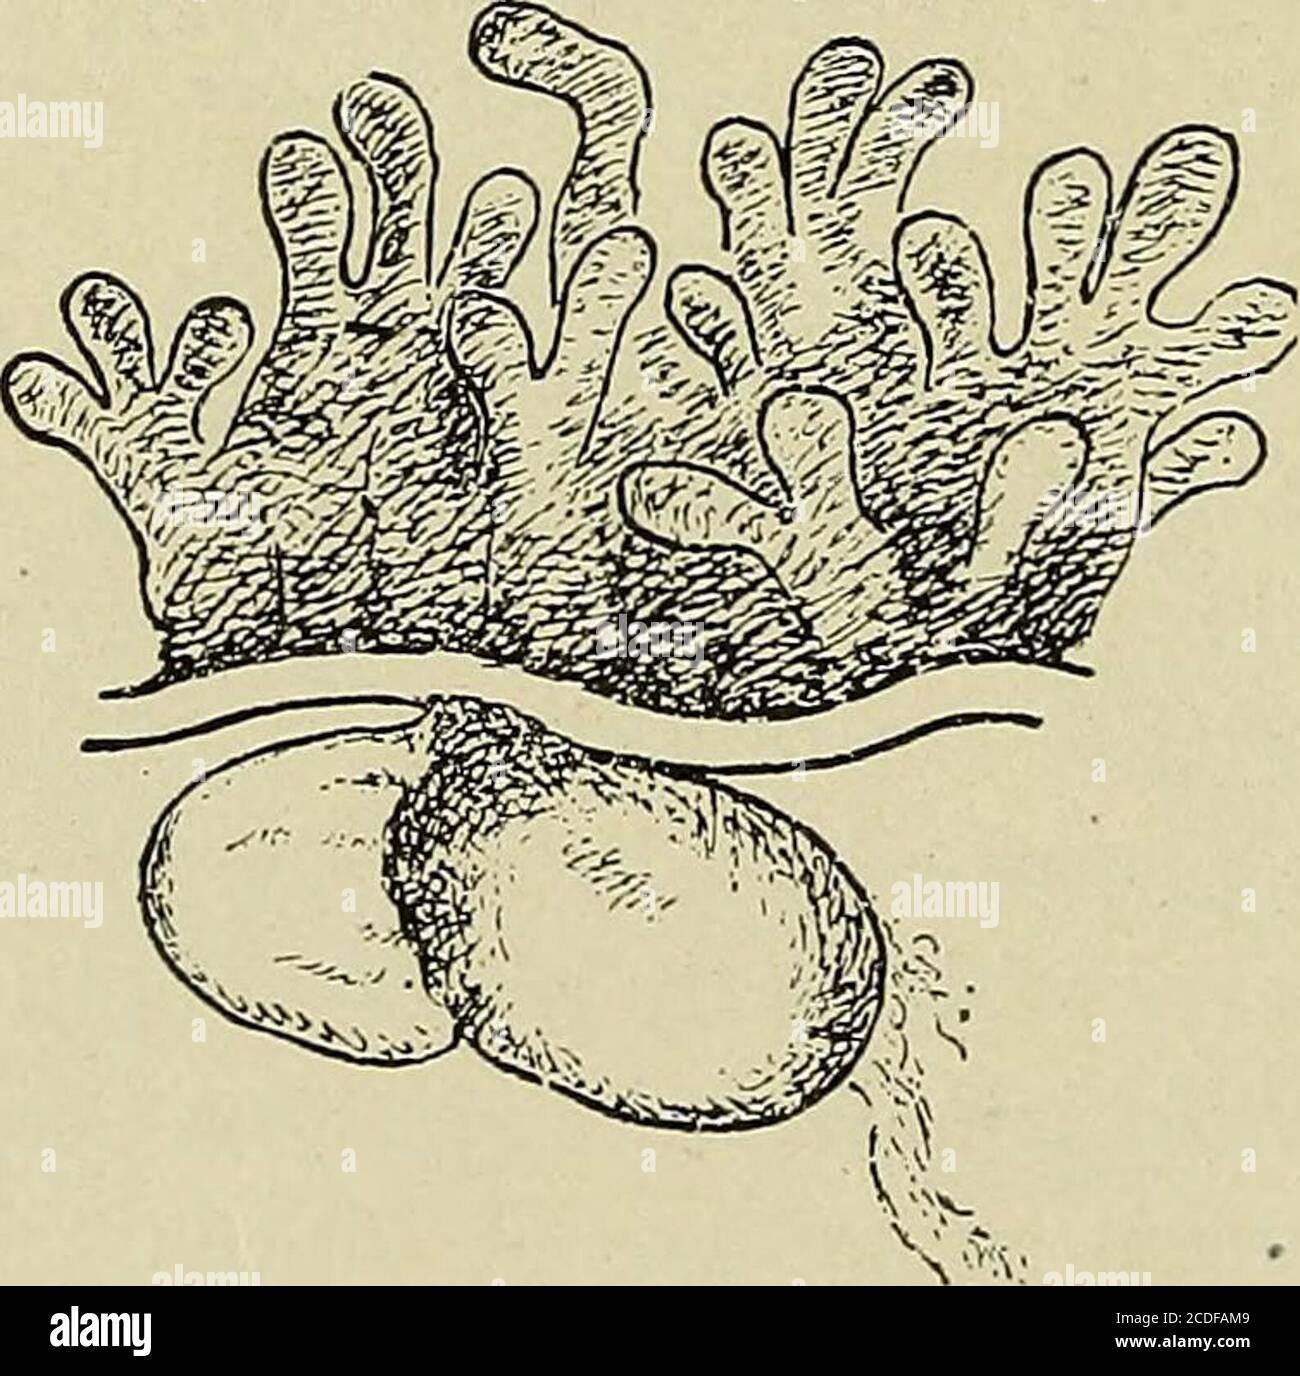 . A study of the causes underlying the origin of human monsters : third contribution to the study of the pathology of human embryos . Fig. 13c.—Section through the umbilical vesicle as it joins the chorion.X 30 times. The large irregular space in the chorion is a blood spacewhich communicates with the veins of the embryo.. Fig. 13d.—Embryonic vesicle attached to the chorion. X 20 times. AfterHis. No. i.] ORIGIN OF HUMAN MONSTERS. 153 The sections show that there is a double embryonic vesiclecomposed of the amnion and umbilical vesicle, the walls ofwhich are thickened and fibrous, with the embr Stock Photo